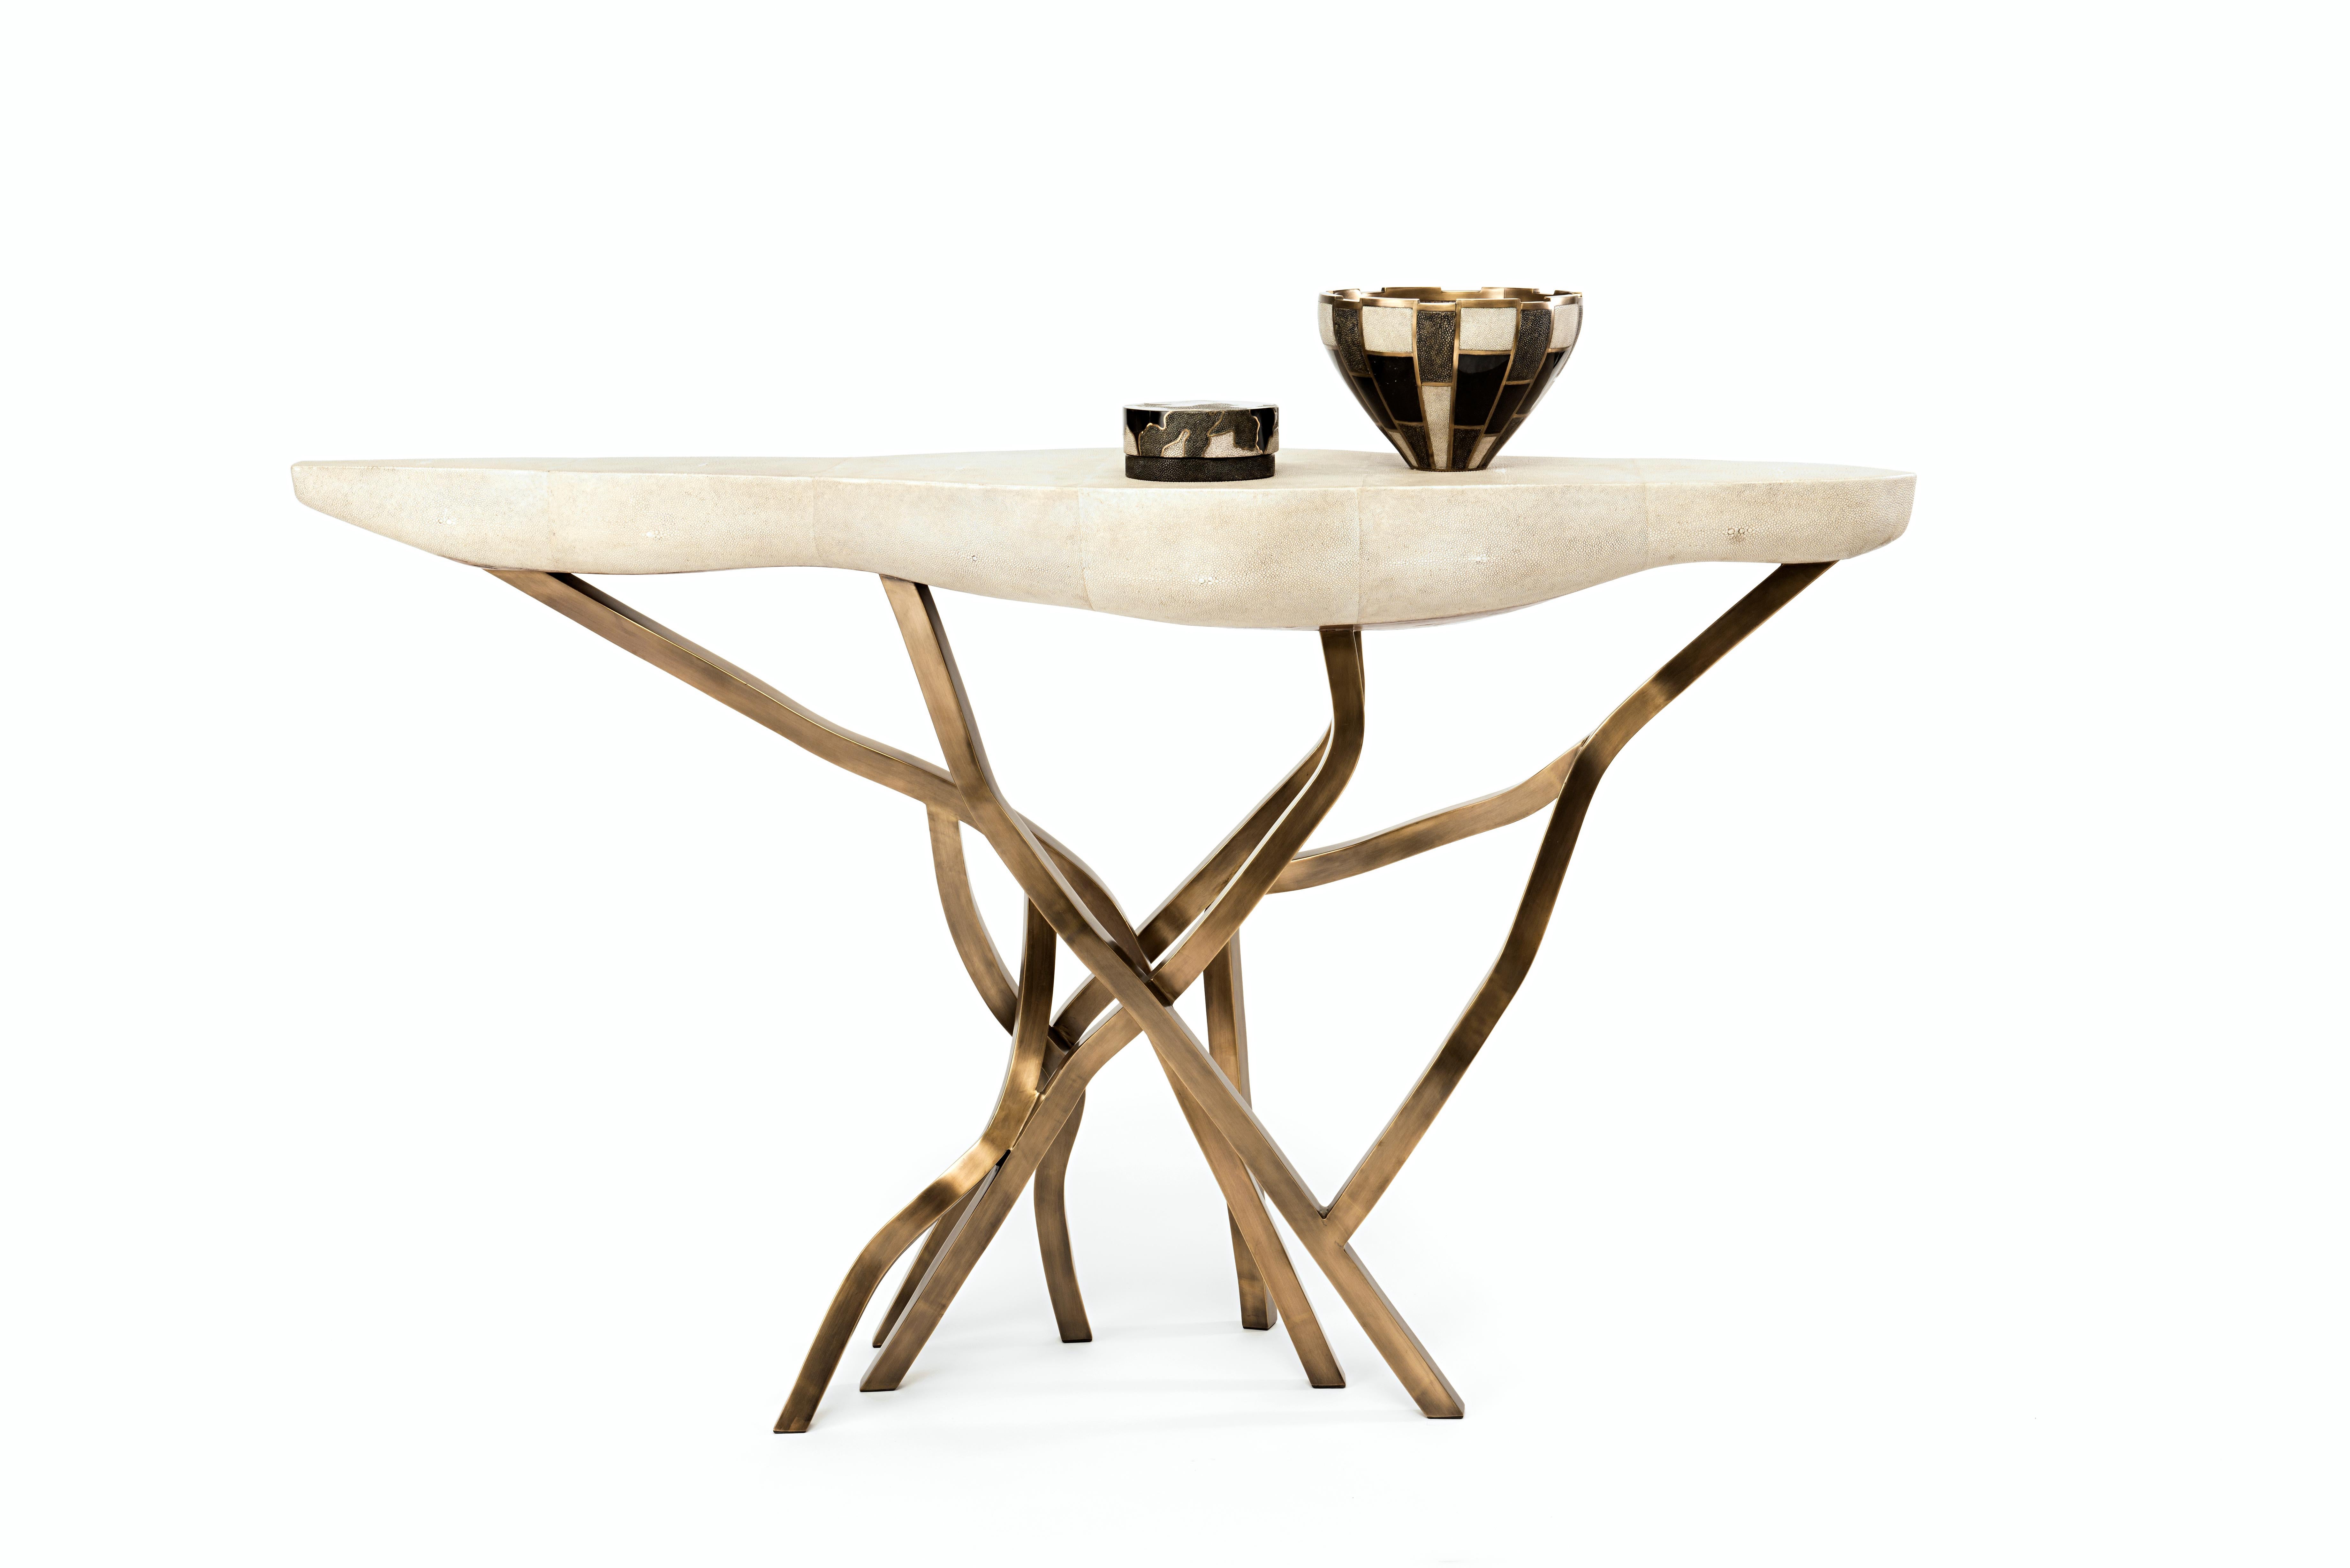 The Acacia console table makes for a dramatic statement piece in any space. The amorphous shaped top is in cream and the organic shaped legs are in bronze-patina brass. Available in black shell as well, see images at end of slide.

The dimensions of